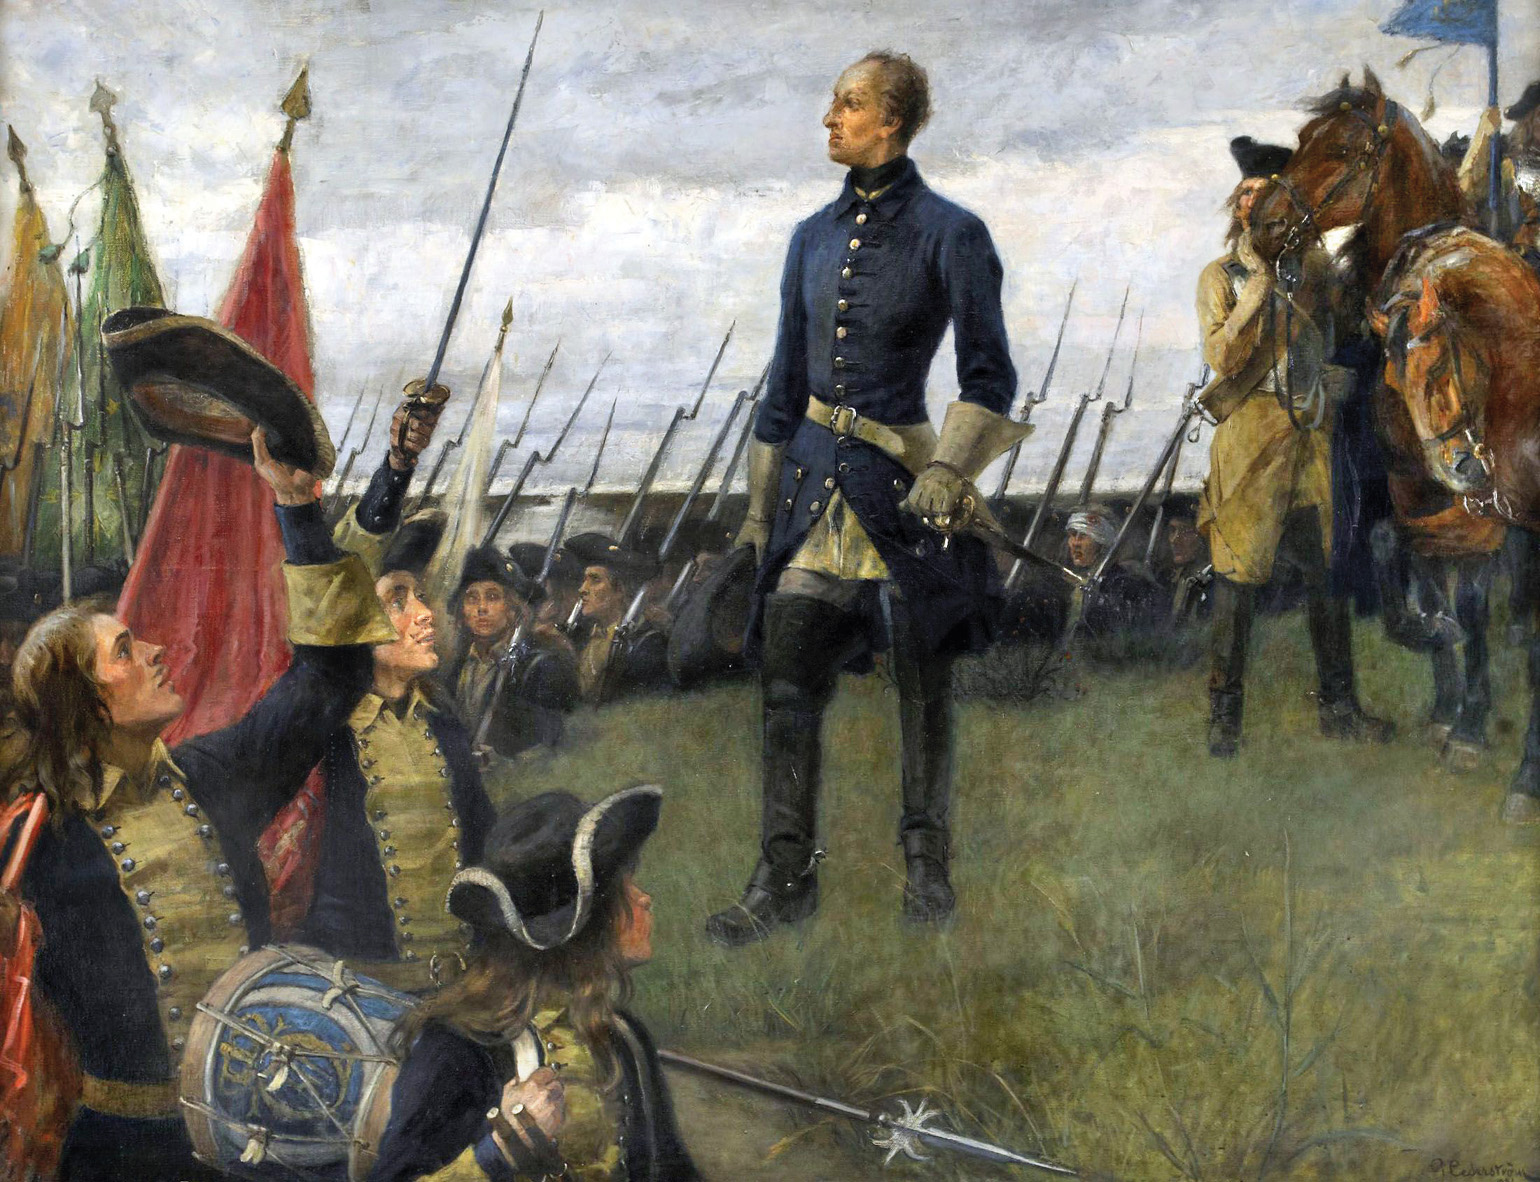 Charles XII reviews his well-trained infantry, which relied heavily on the cold steel of the bayonet in battle.